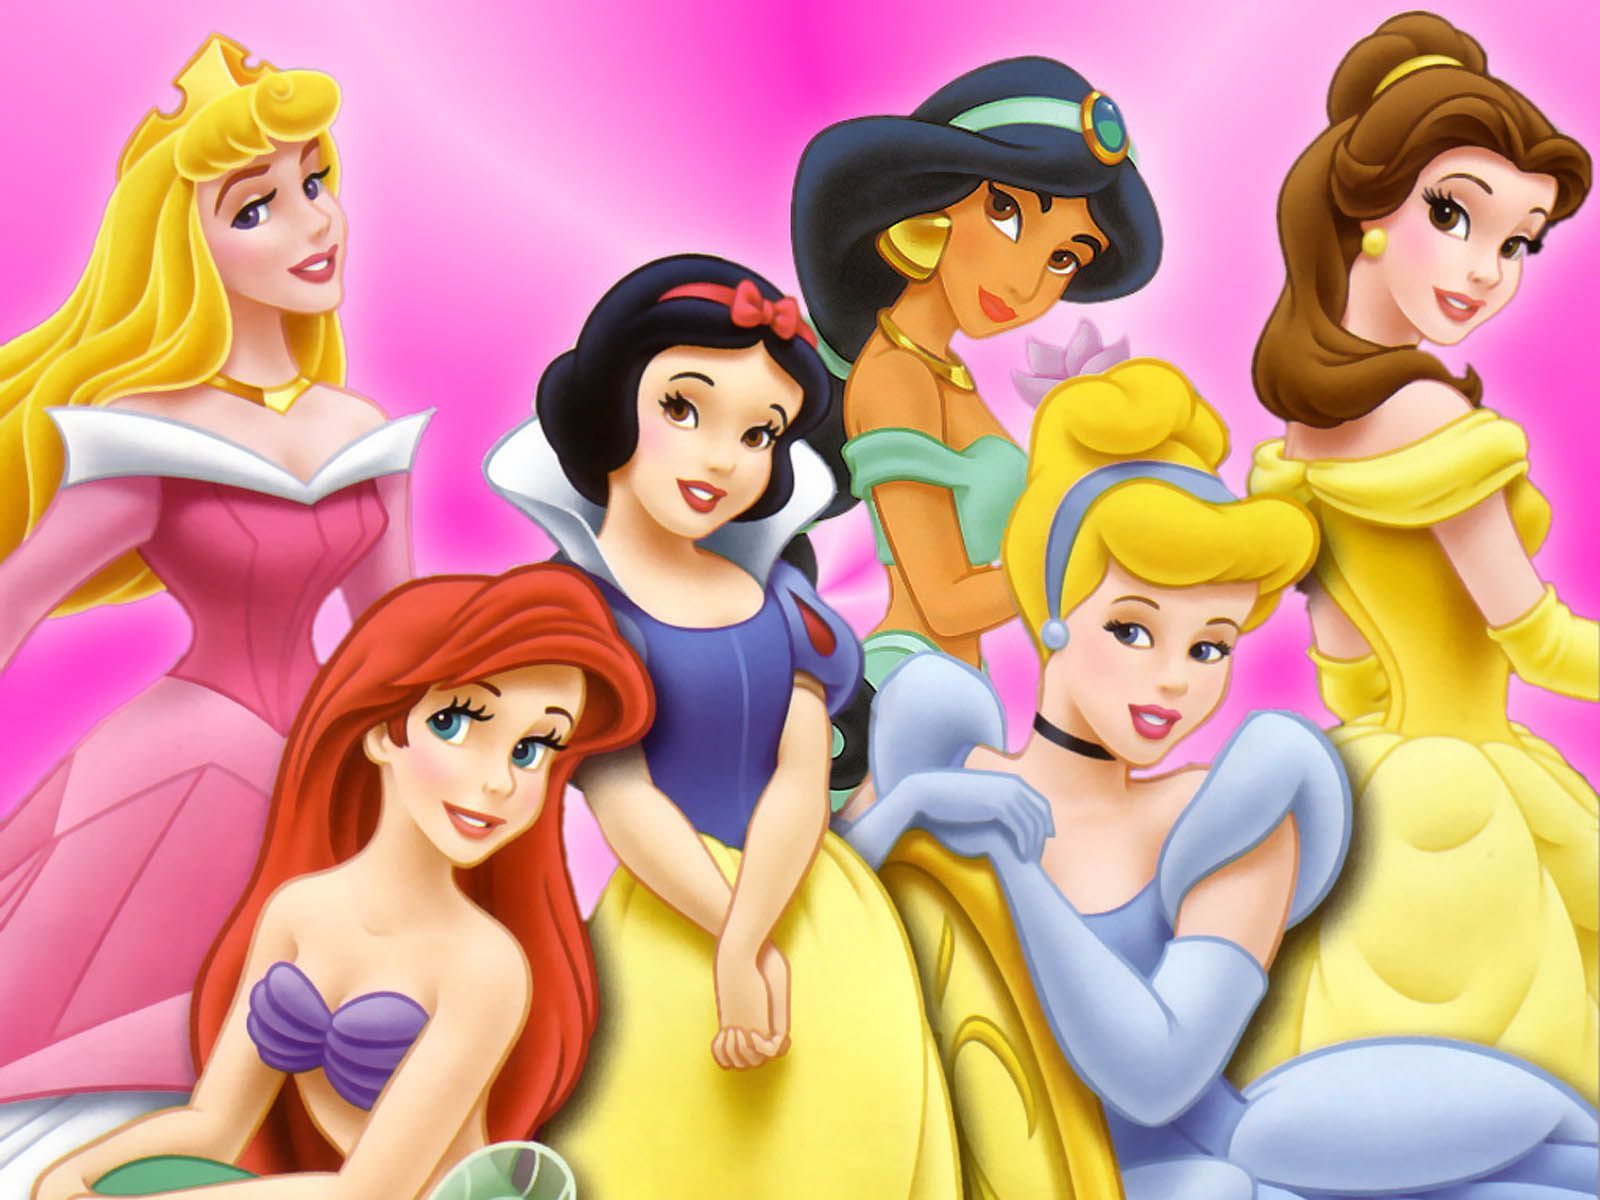 Collection of Disney Princess Wallpaper on HDWallpaper 1830×1210 Disney Princess Wallpaper 65 Wal. Disney princess wallpaper, Disney princess picture, Disney